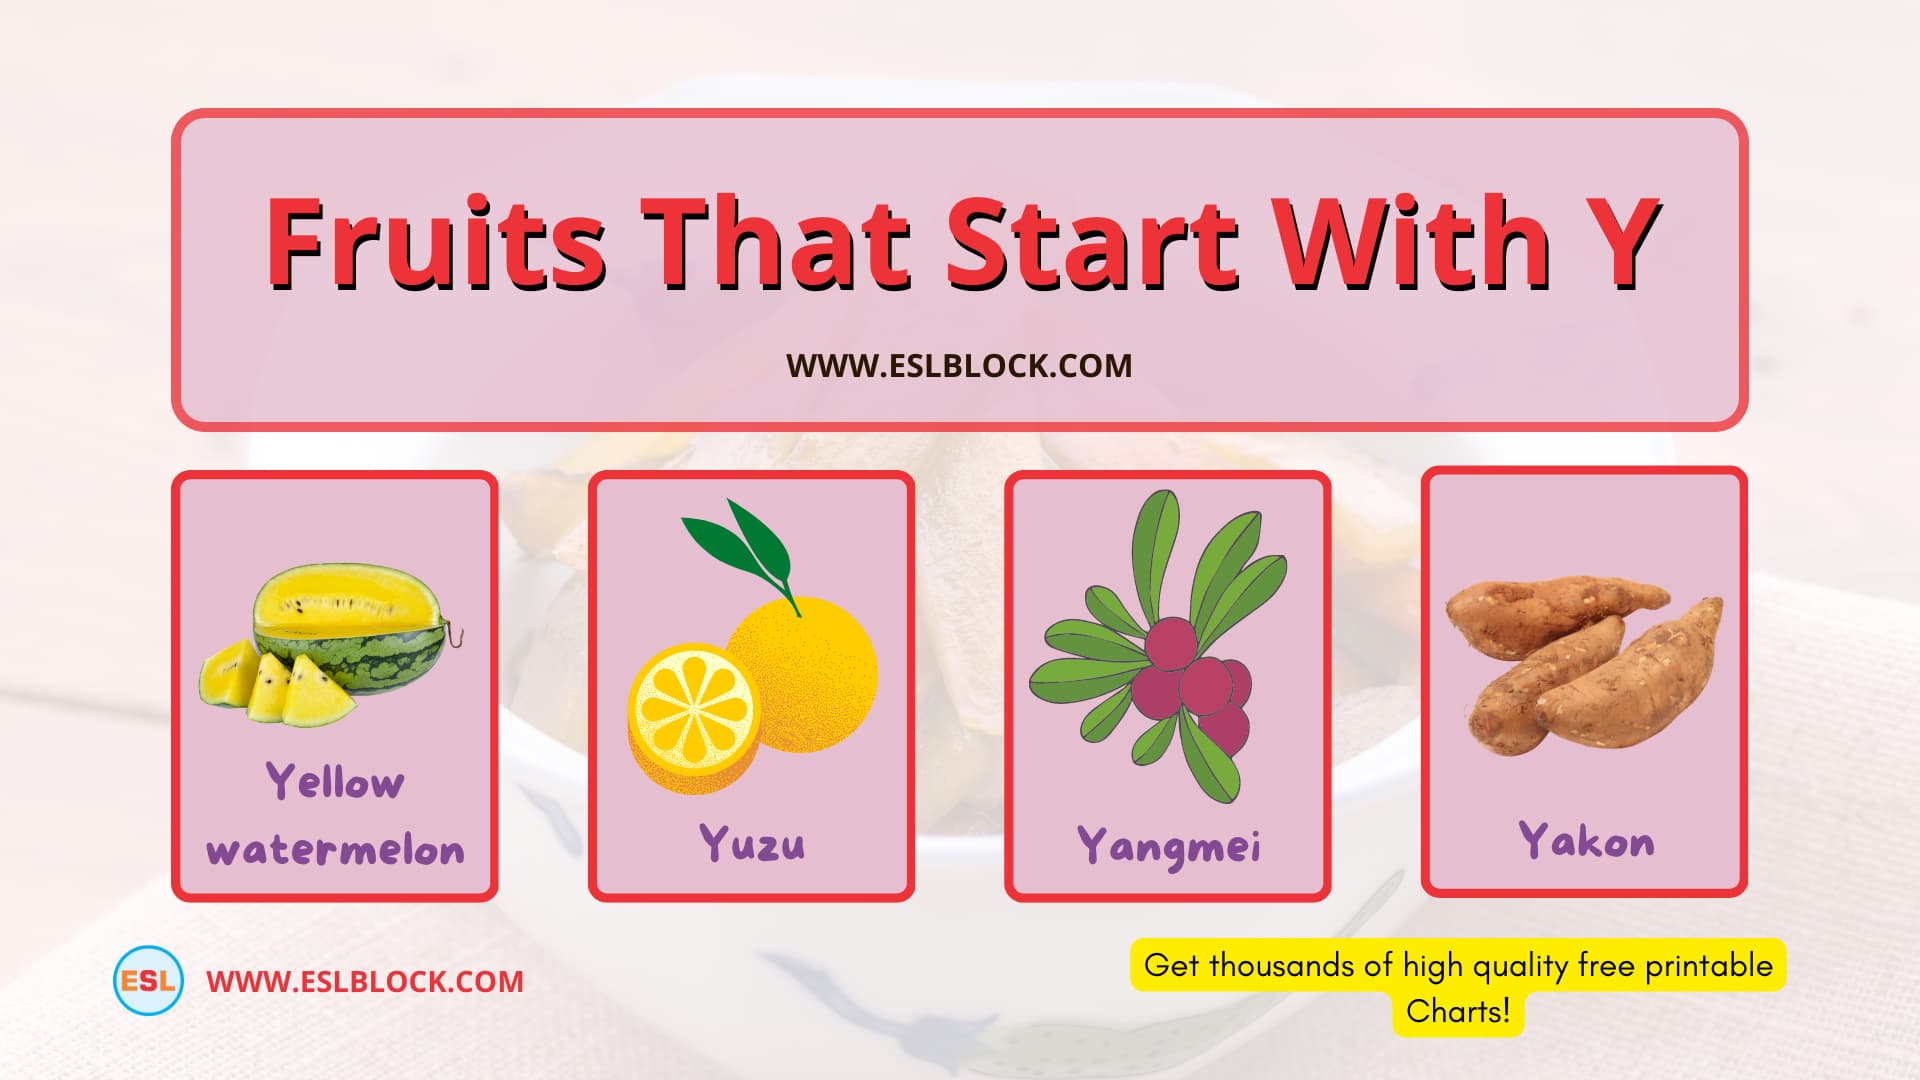 Fruits that start with Y